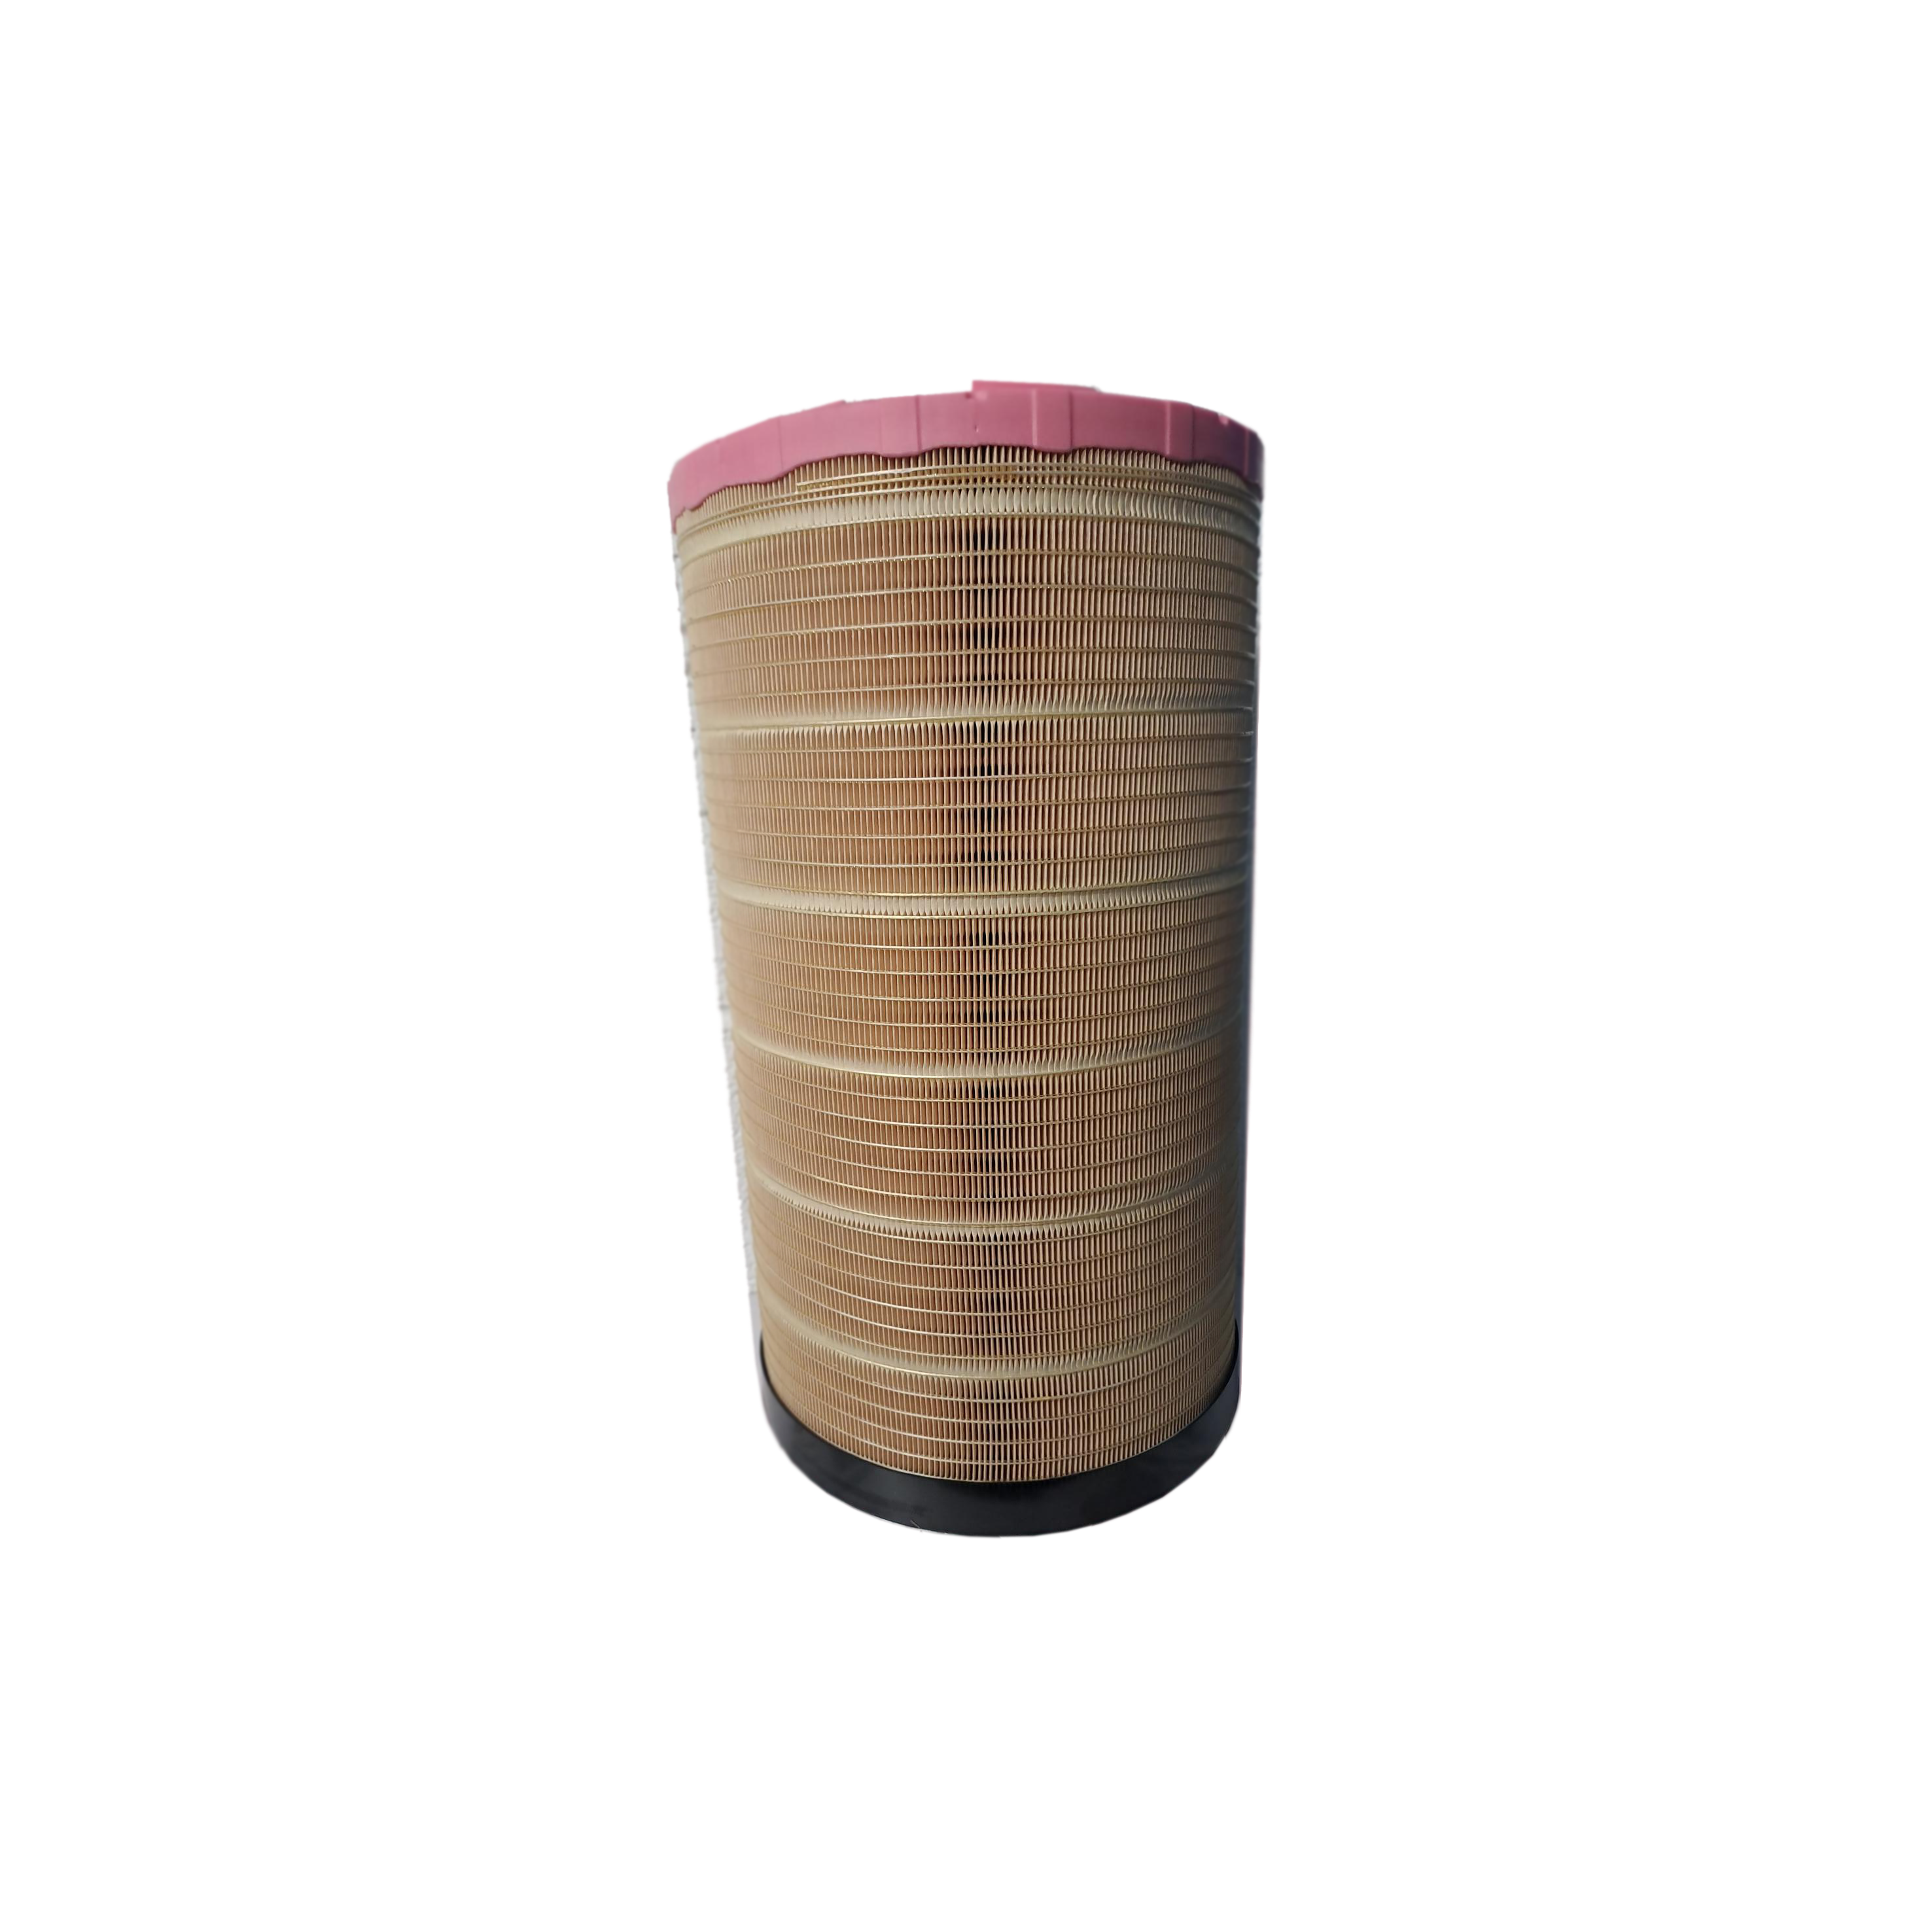 Primary Air Filter for Atlas 350MH